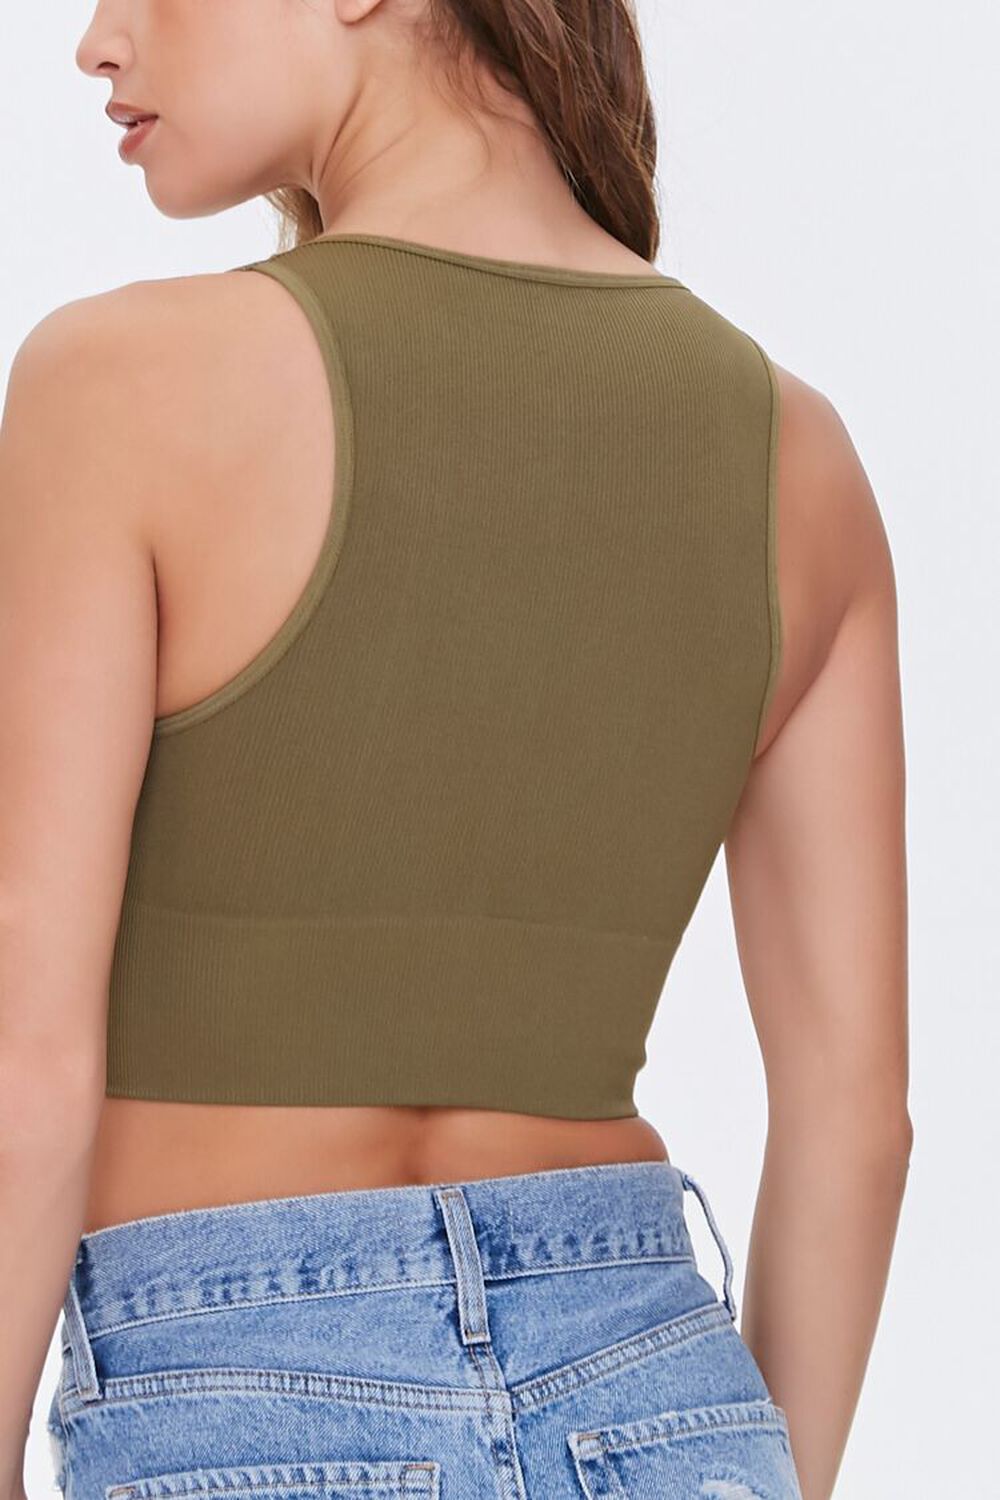 DARK OLIVE Cropped Ribbed Knit Tank Top, image 3